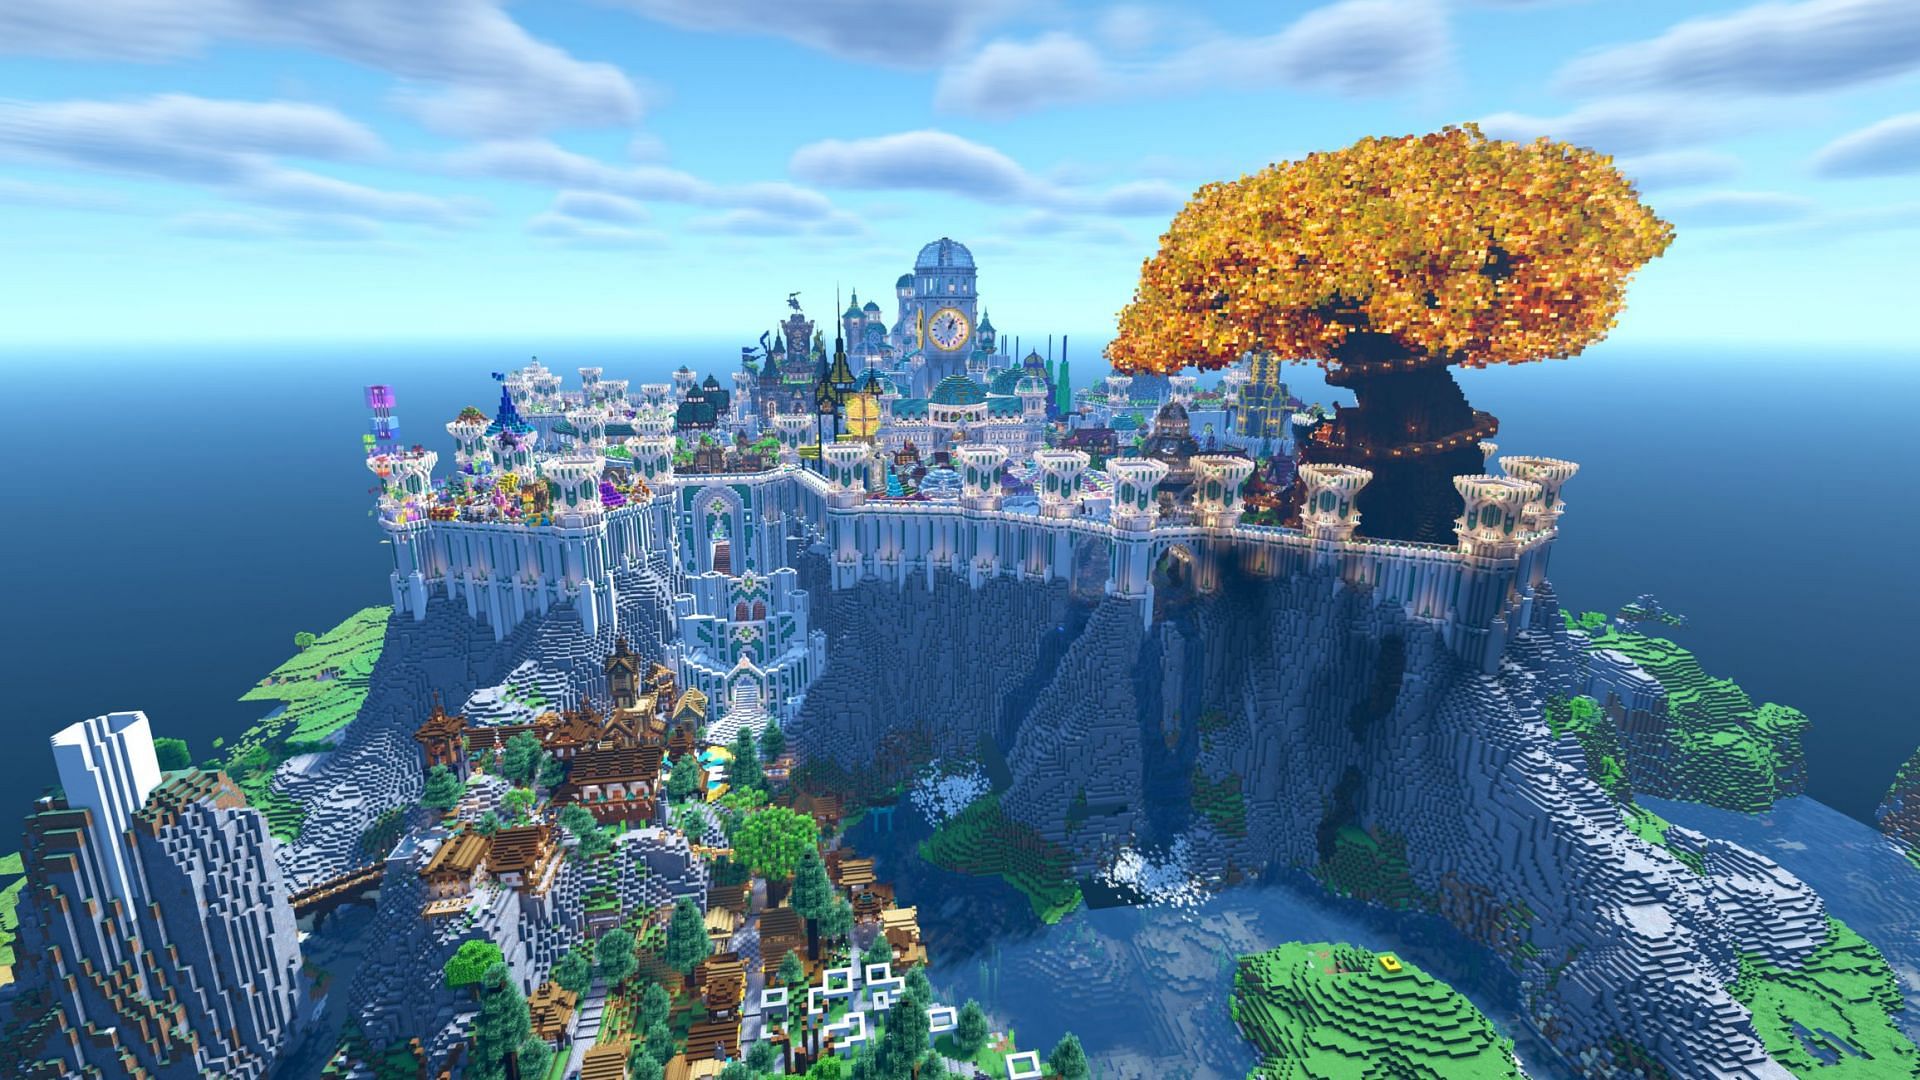 This build took over a year of work from multiple dedicated builders (Image via u/Astrophagy/Reddit)